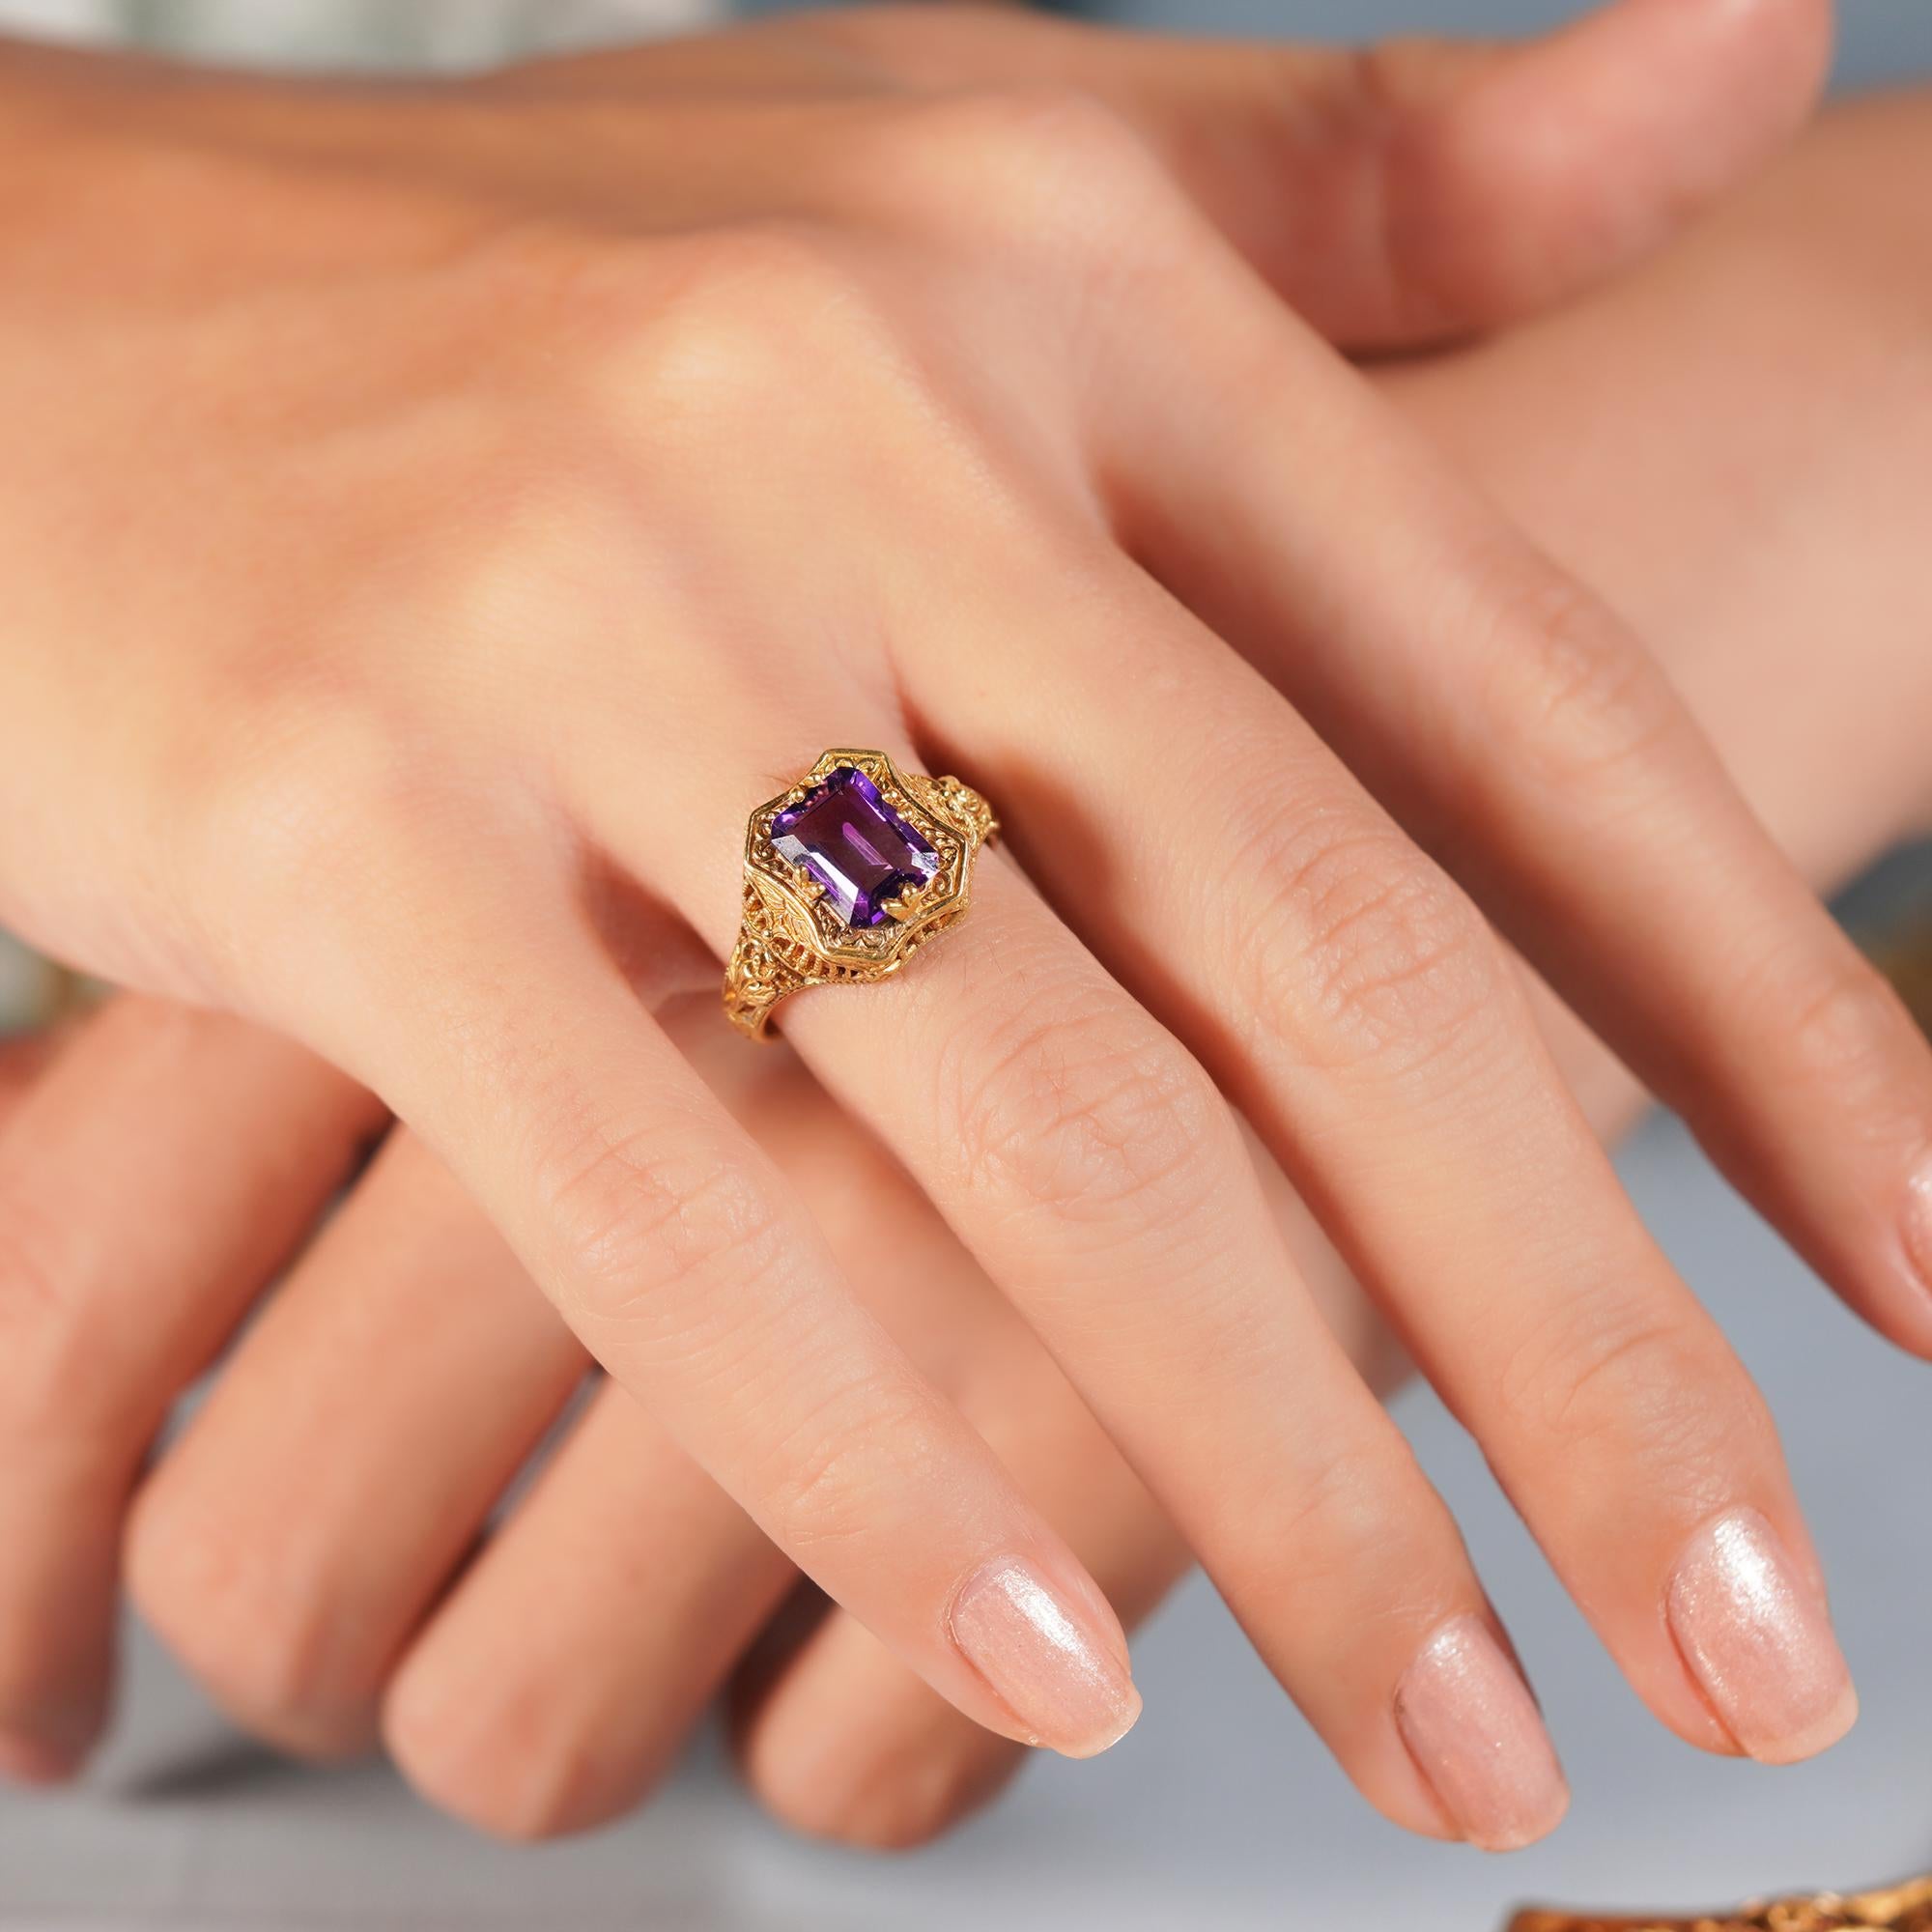 For Sale:  Natural Emerald Cut Amethyst Vintage Style Filigree Ring in Solid 9K Yellow Gold 10